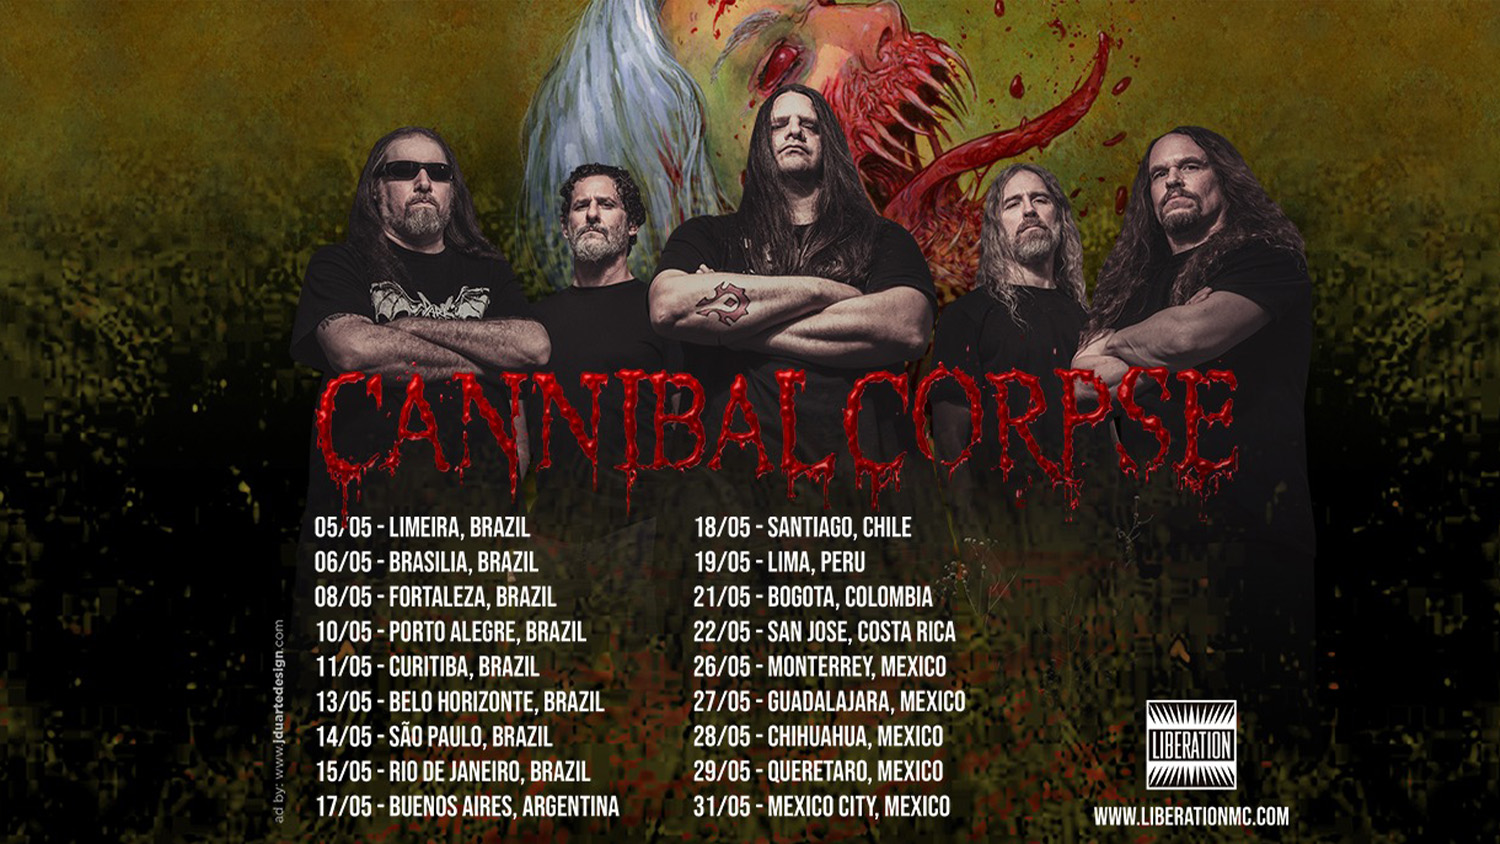 cannibal corpse tour 2022